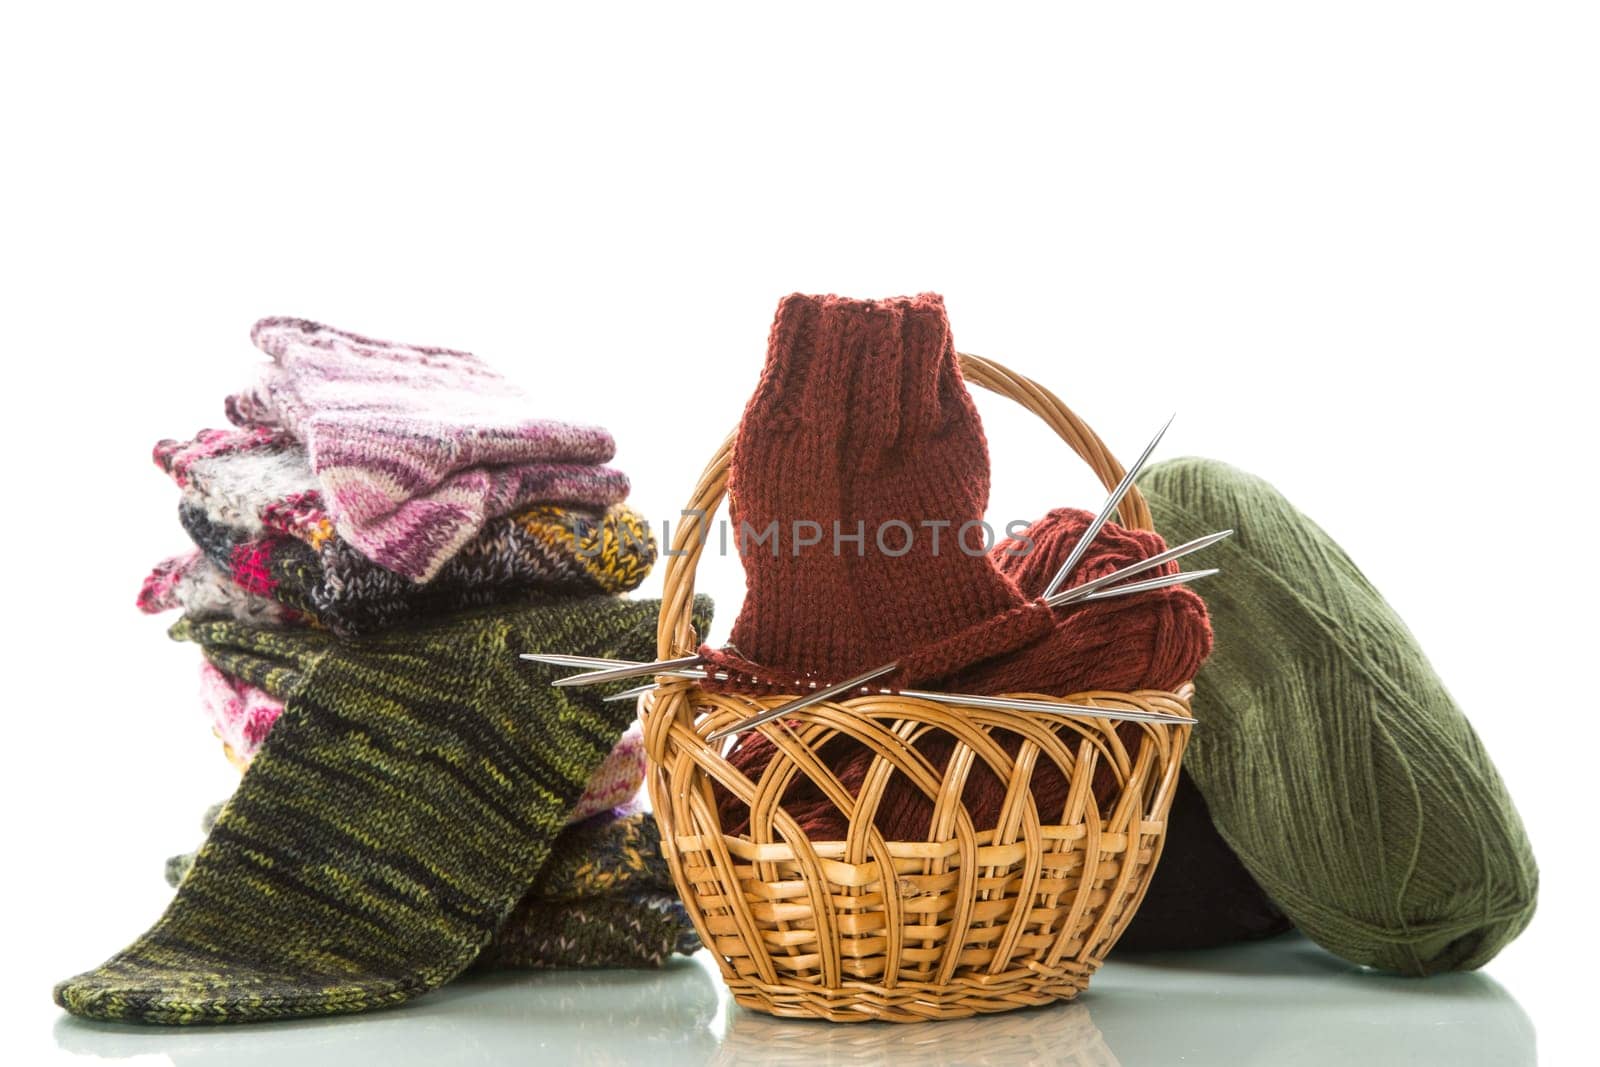 Colored threads, knitting needles and other items for hand knitting, isolated on a white background.